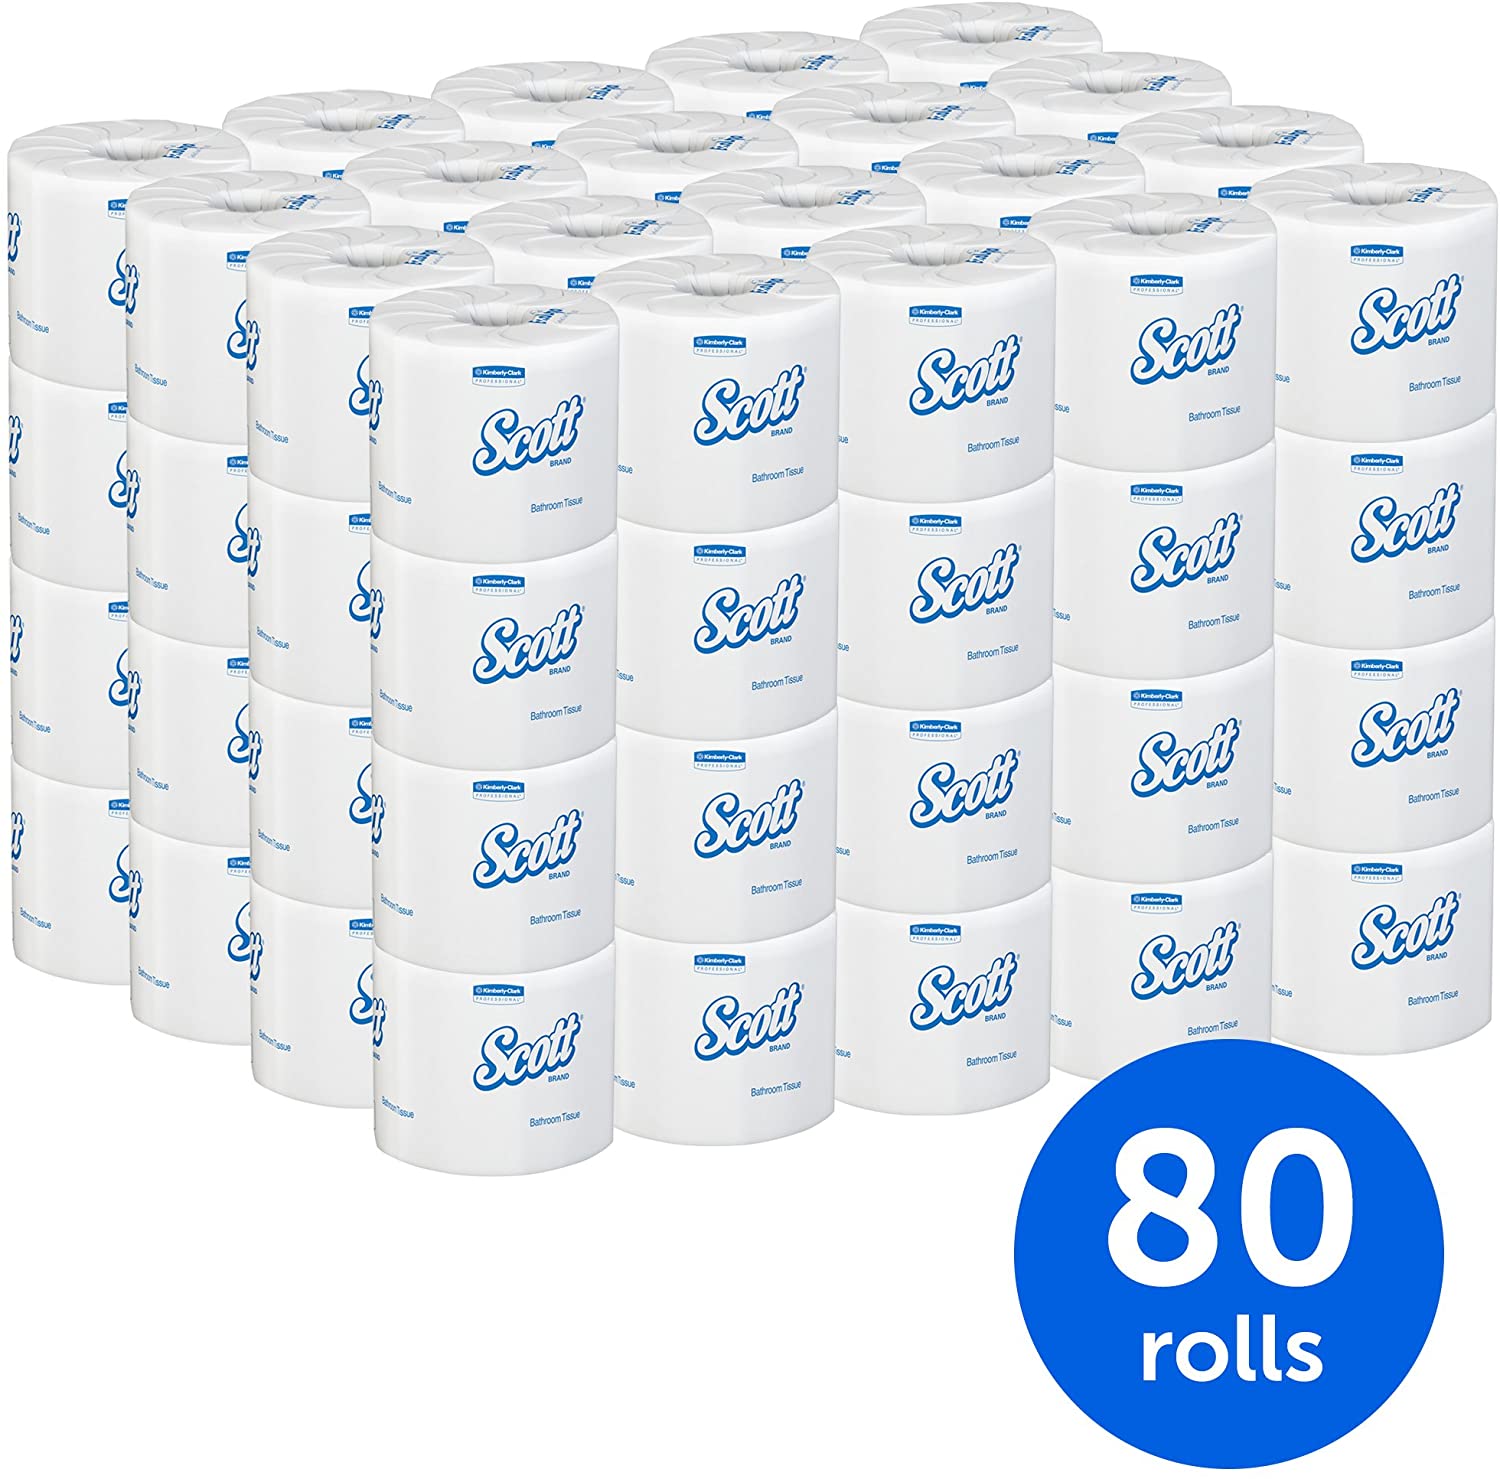 Scott Essential Professional 100% Recycled Fiber Bulk Toilet Paper for Business (13217), 2-PLY Standard Rolls, White, 80 Rolls / Case, 506 Sheets / Roll